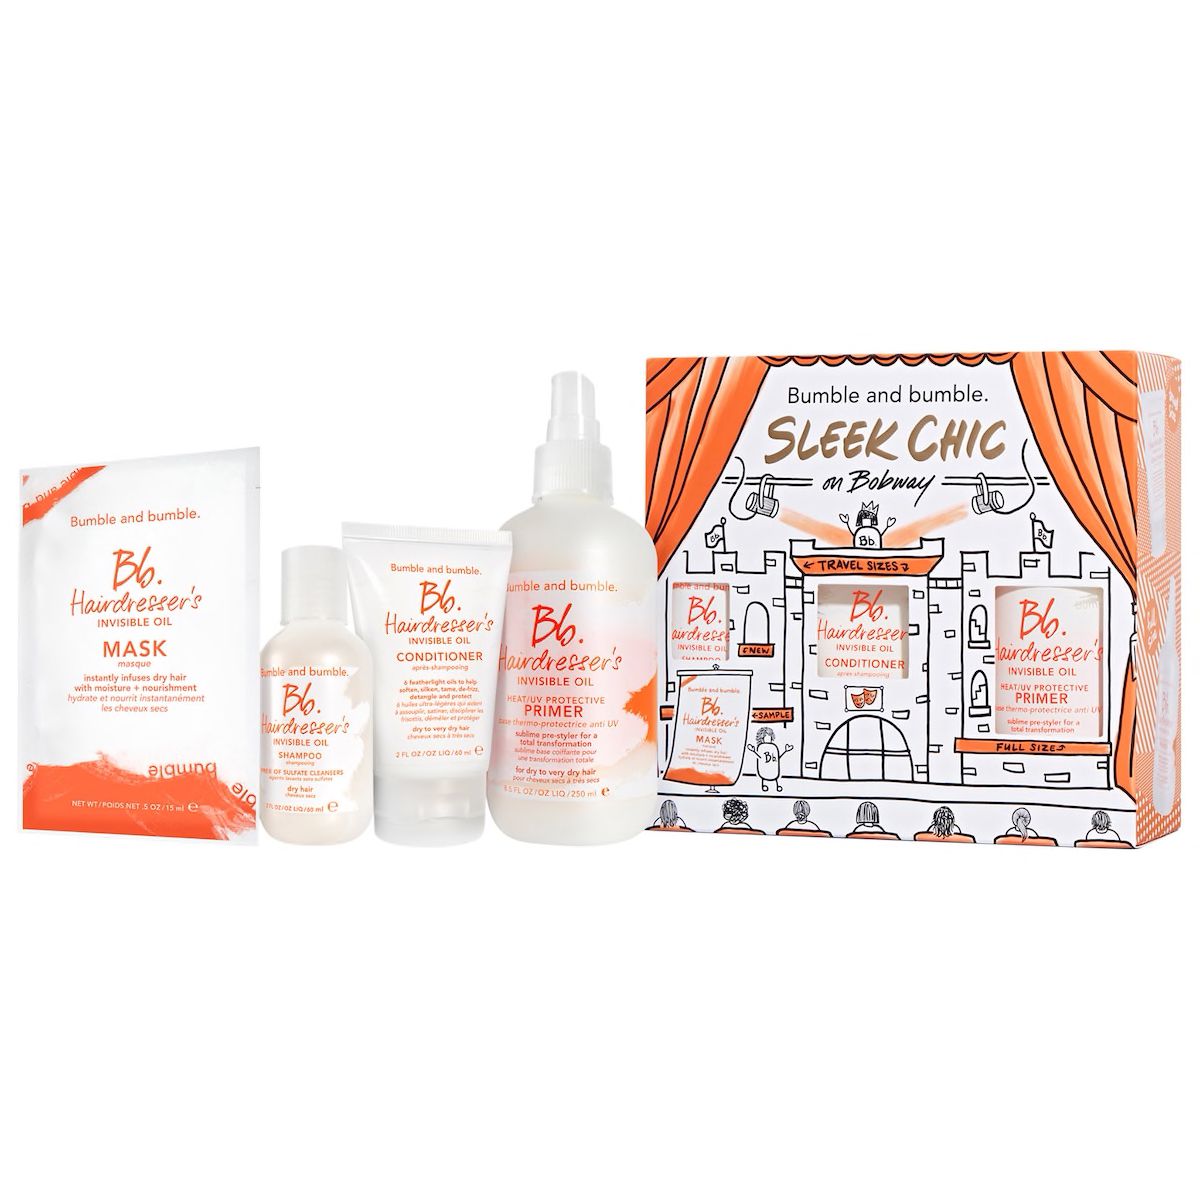 Bumble and bumble Sleek Chic Hairdresser's Invisible Oil Set